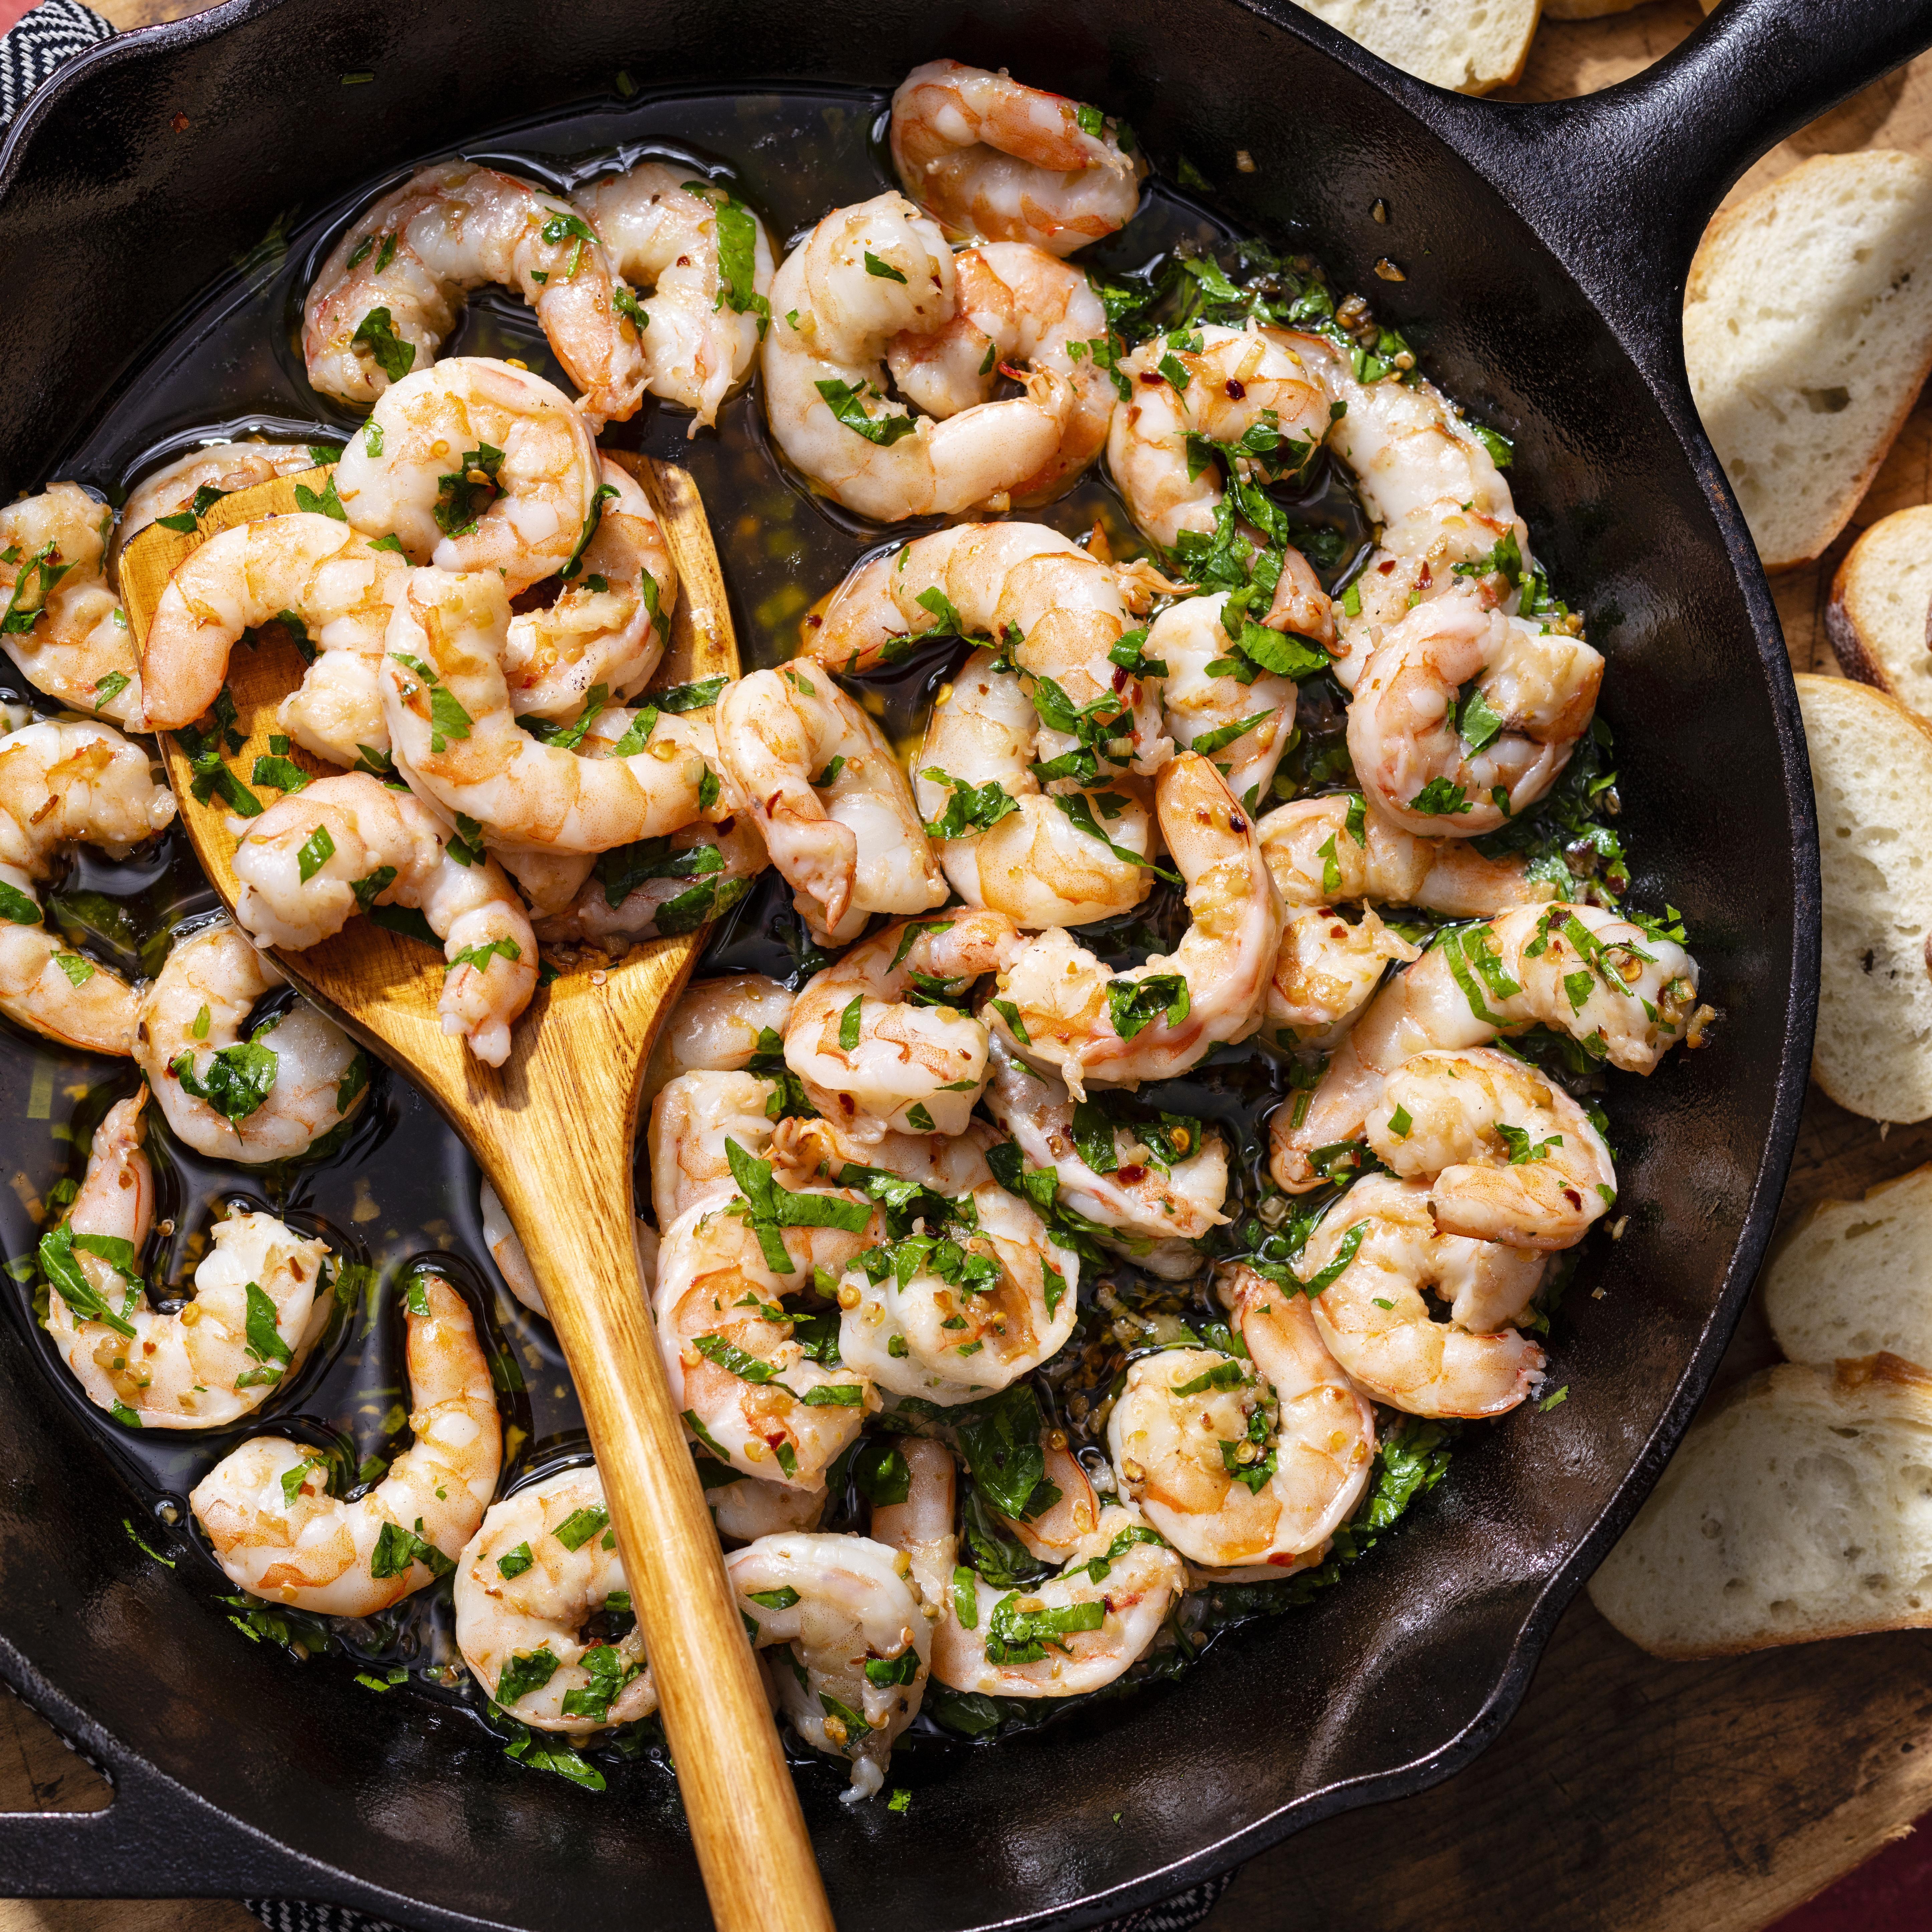 Today's Gadget is the New Cast Iron Shrimp Pan!